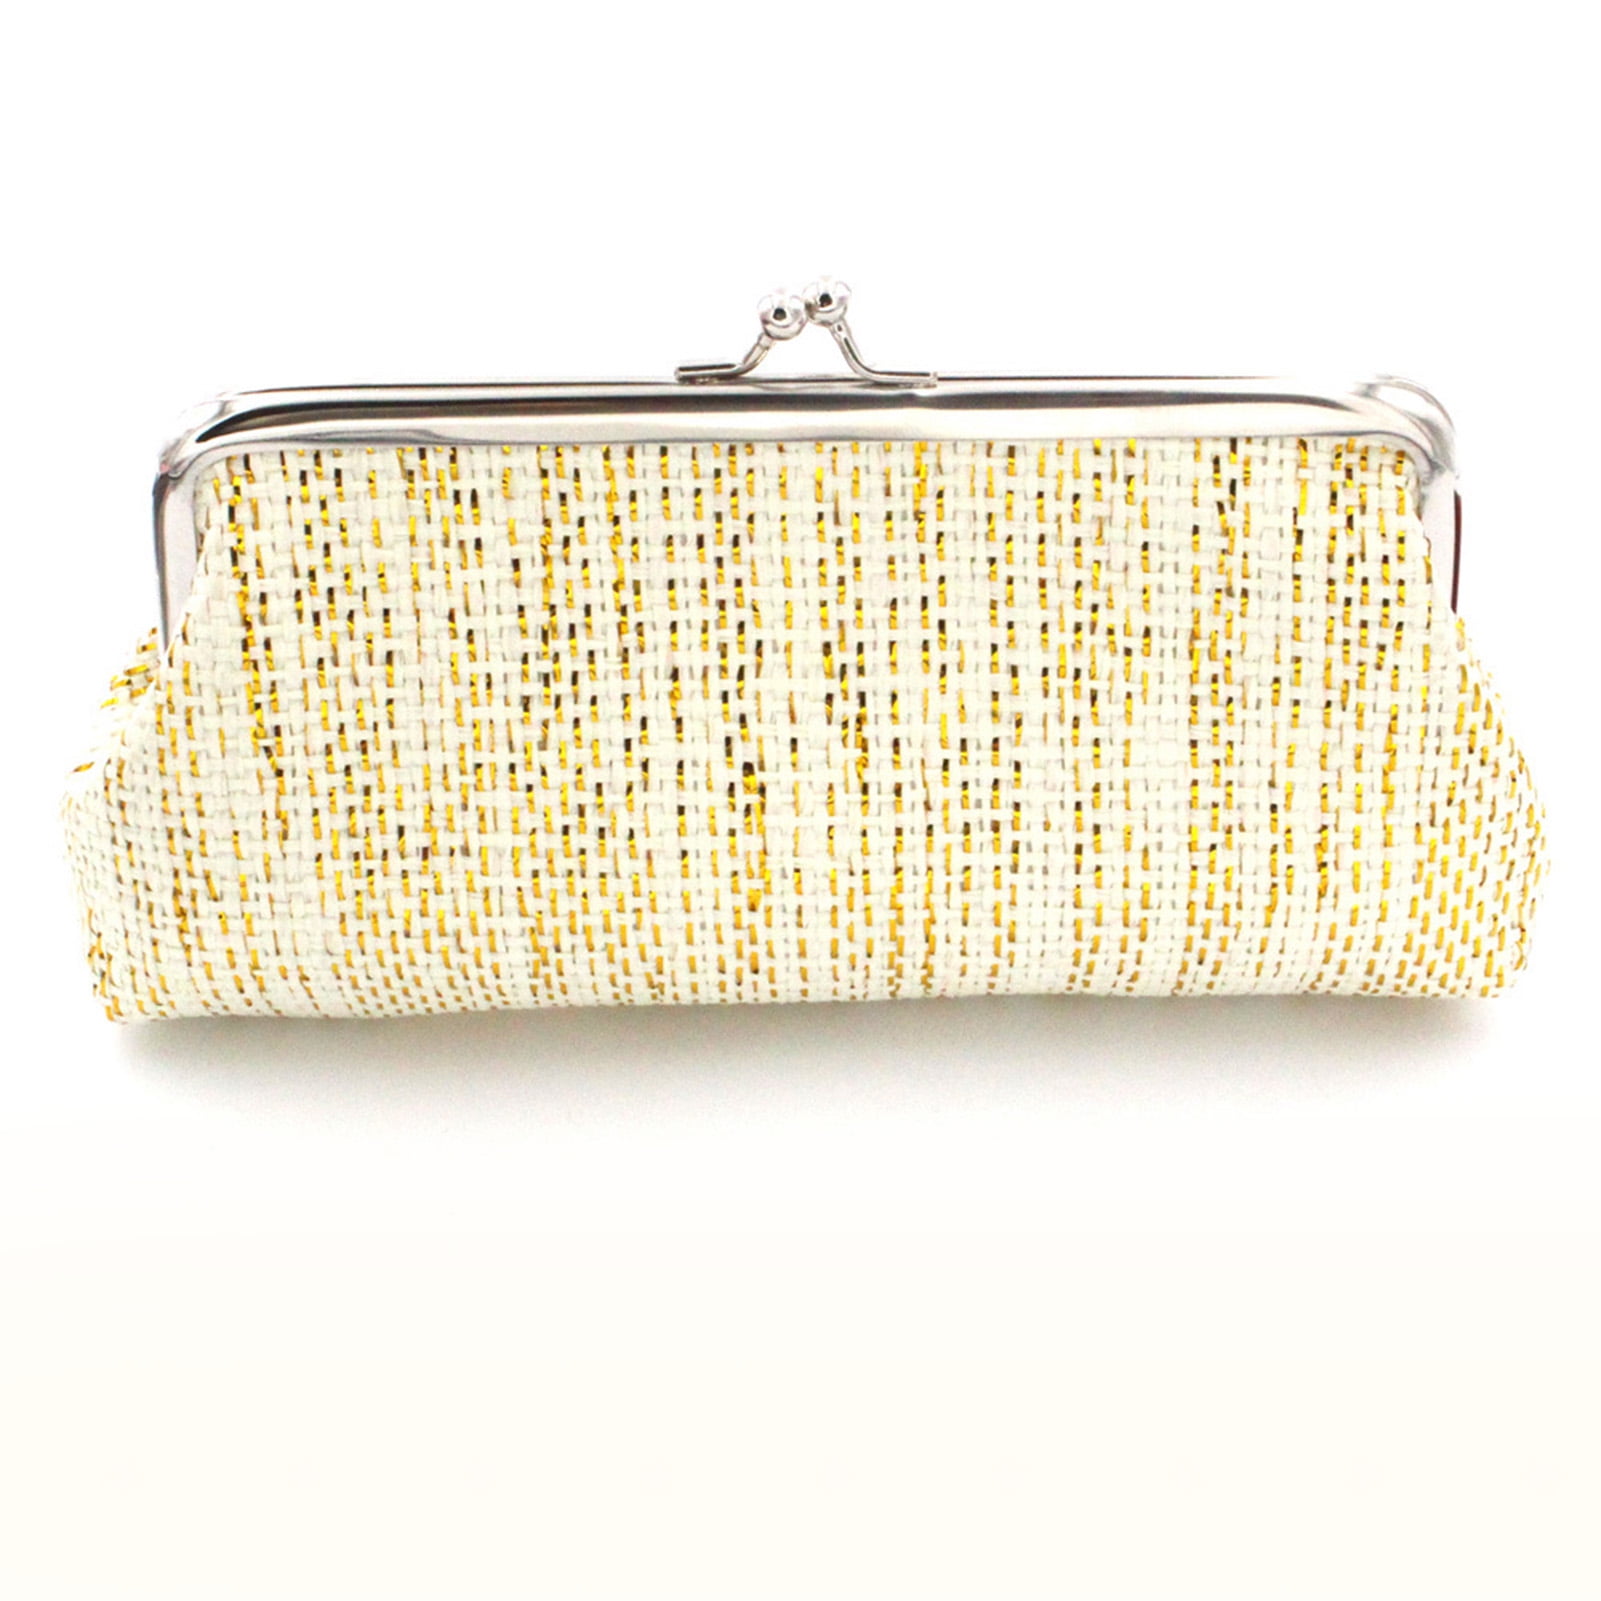 Yellow floral design women's coin purse wallet clutch handbag with silver color metal frame kiss clasp